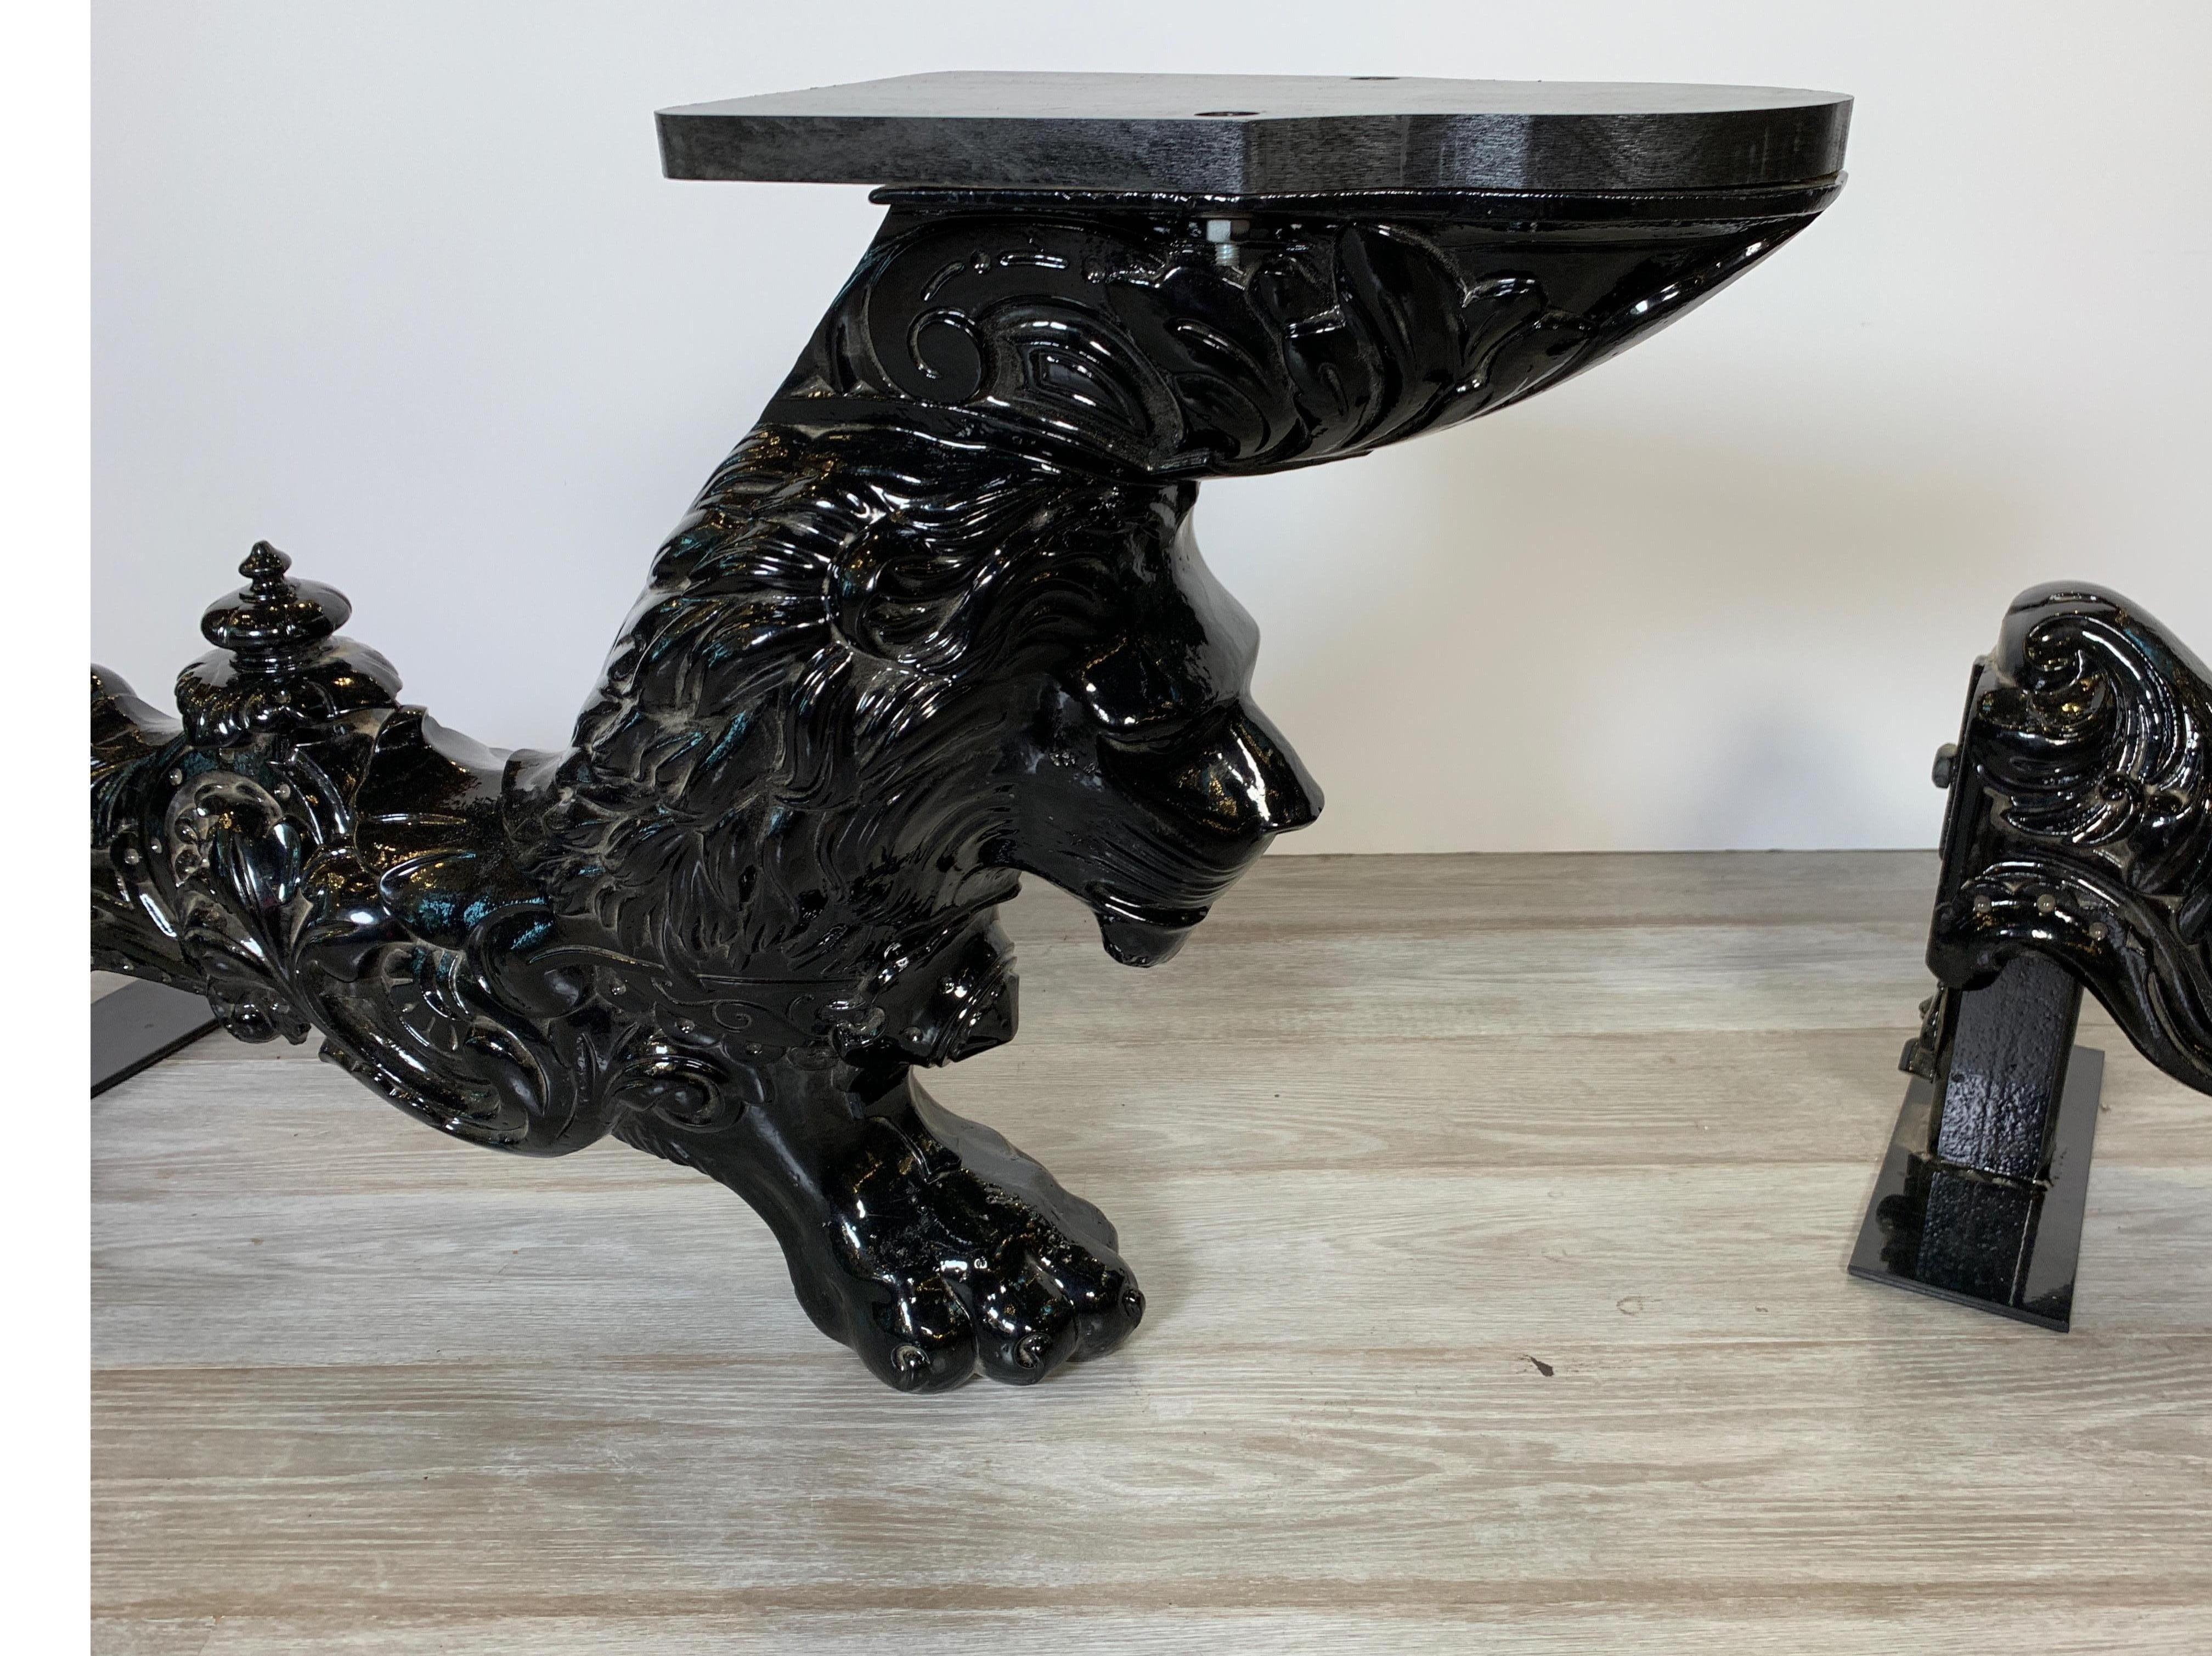 Large cast iron salvaged table legs in the form of lions, repurposed with wooden shelves attached - very unique pieces which could be used in any number of ways, quite remarkable!